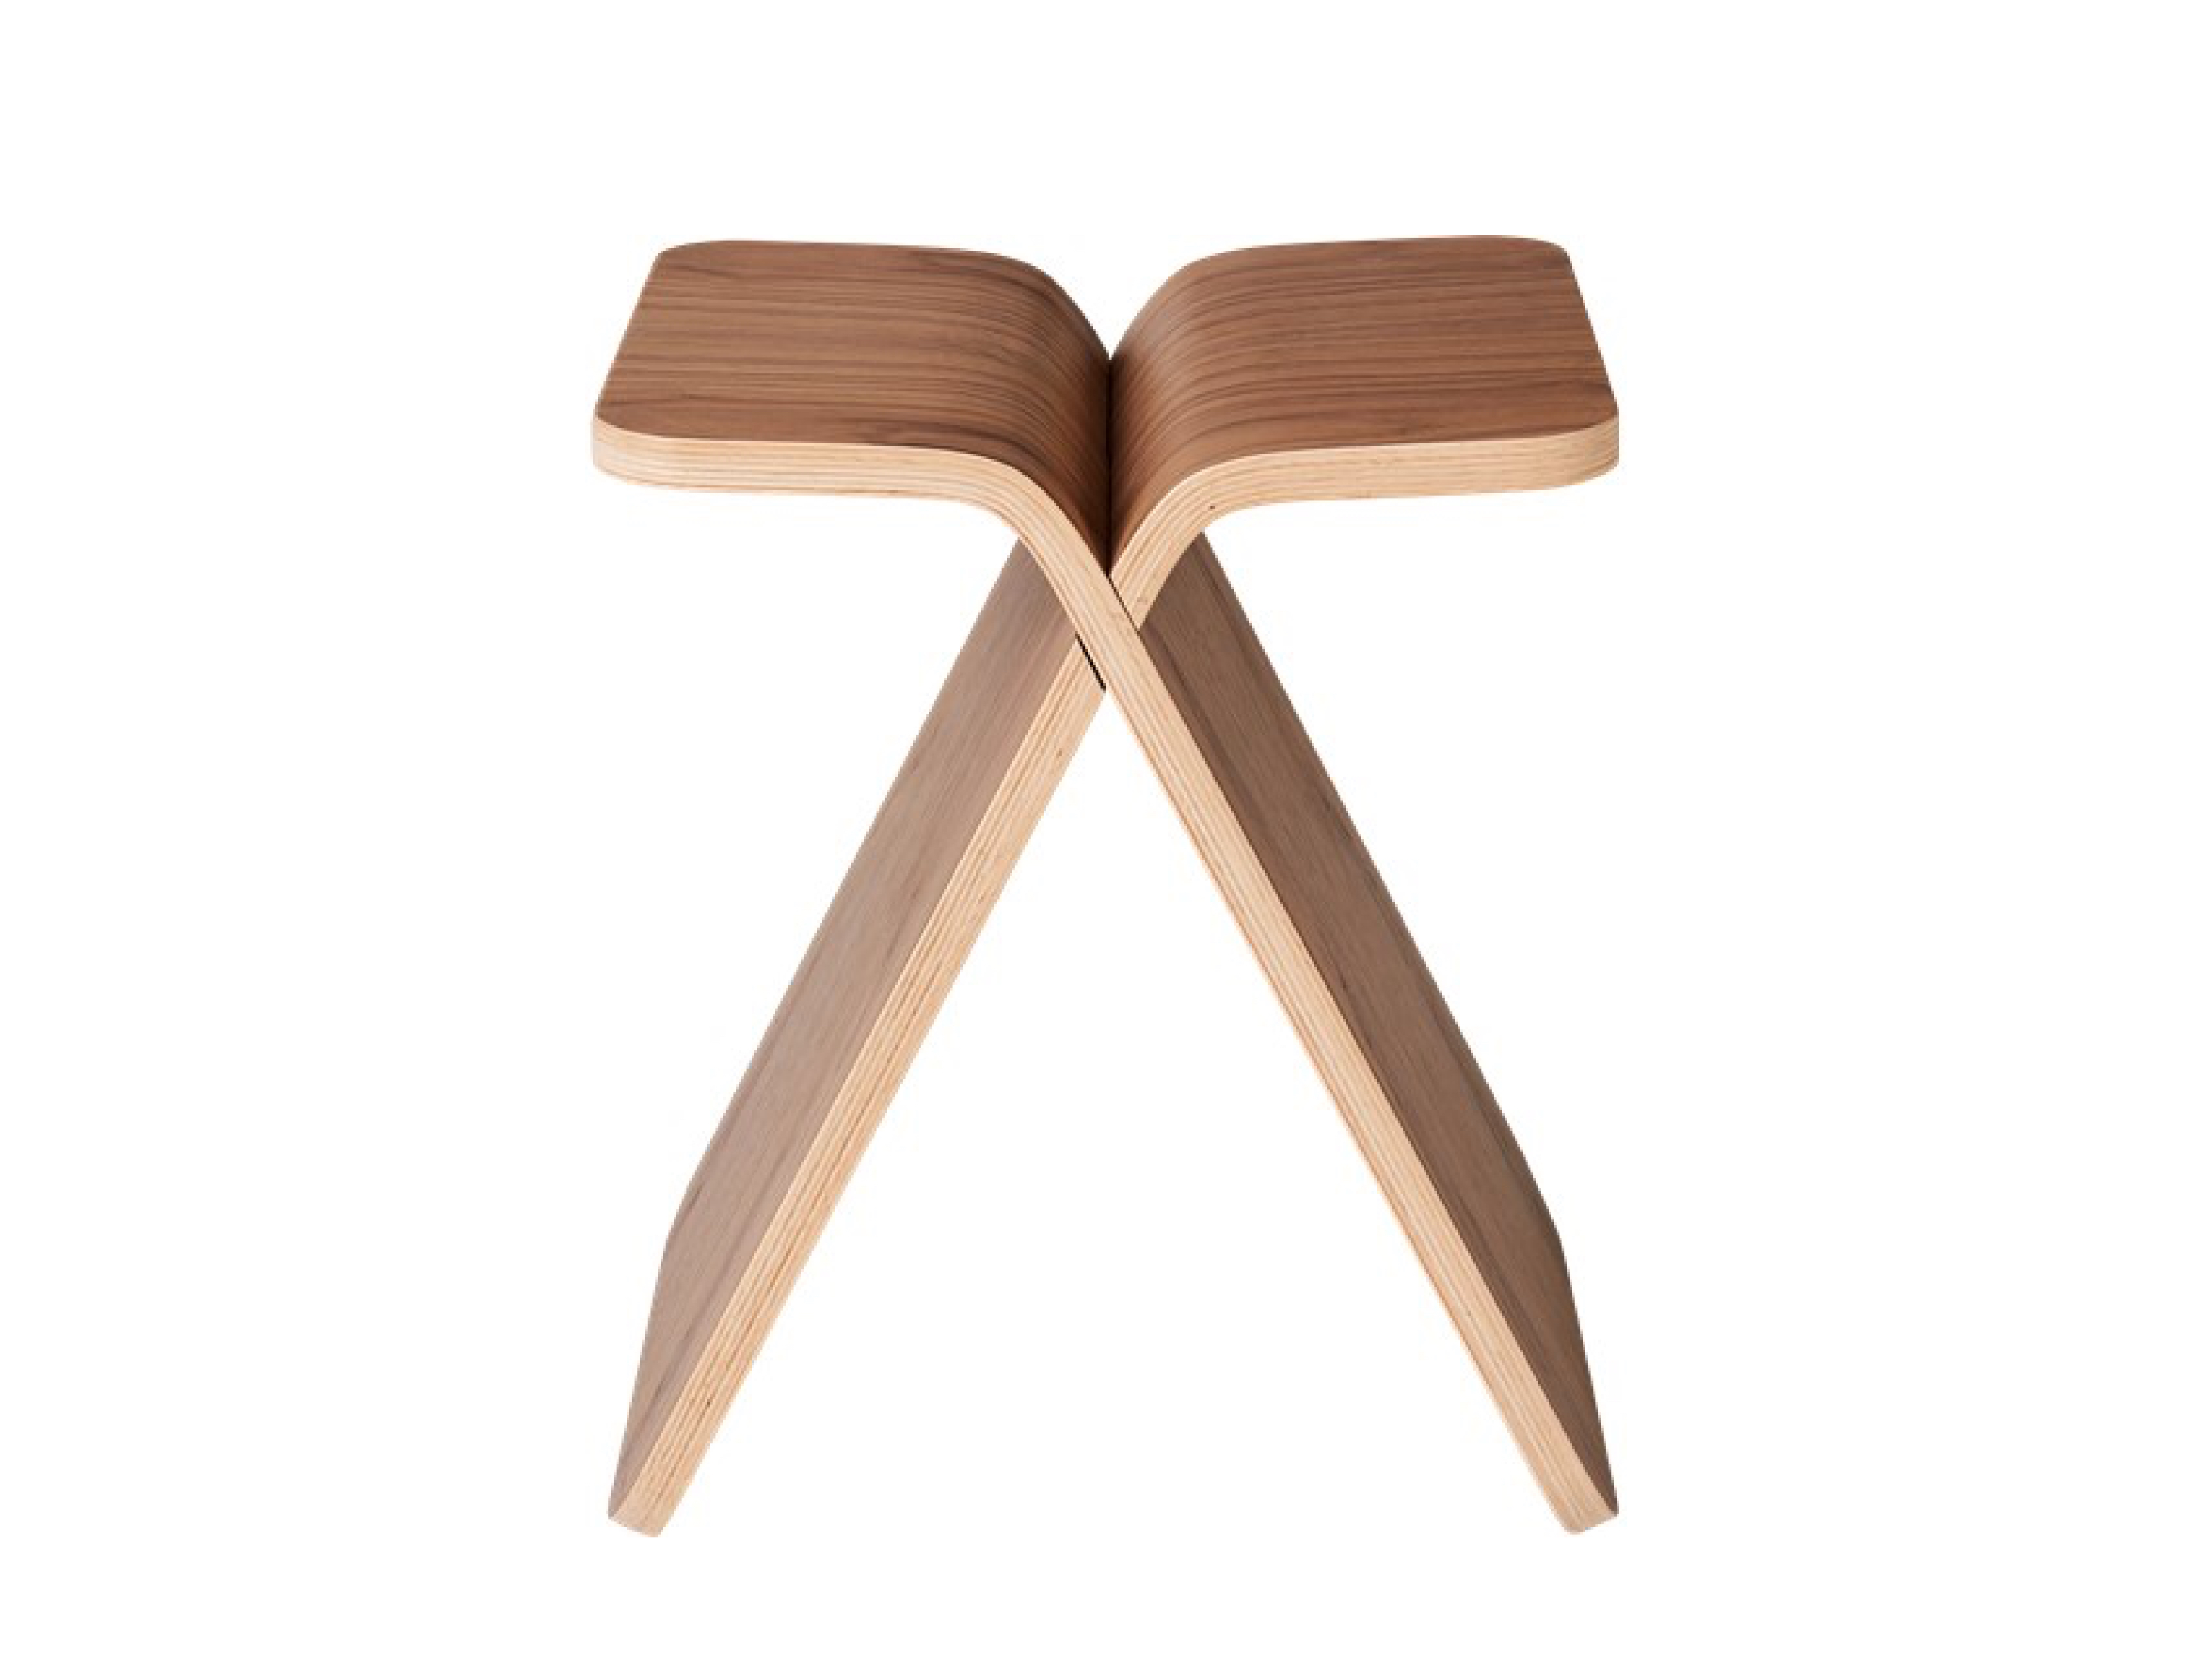 X-Stool Wooden Stool by Bolia - Steelcase